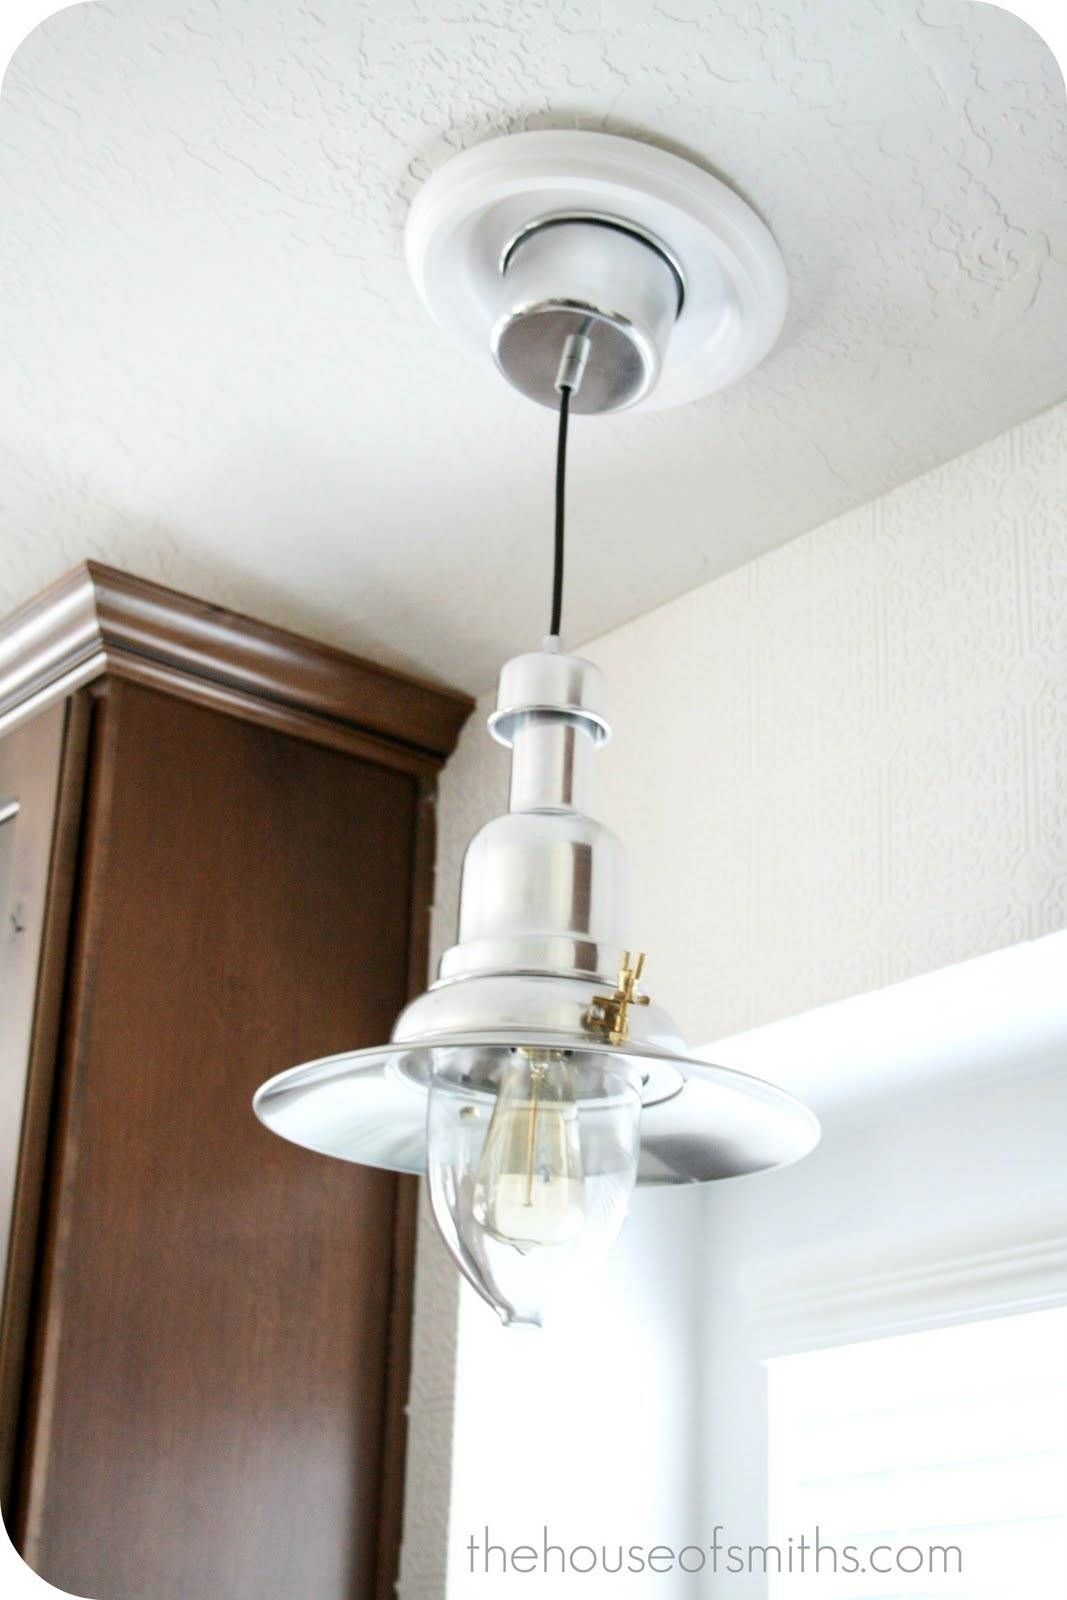 New Kitchen Lighting – Converting A Can Light With A Recessed Intended For Recessed Light To Pendant Lights (View 9 of 15)